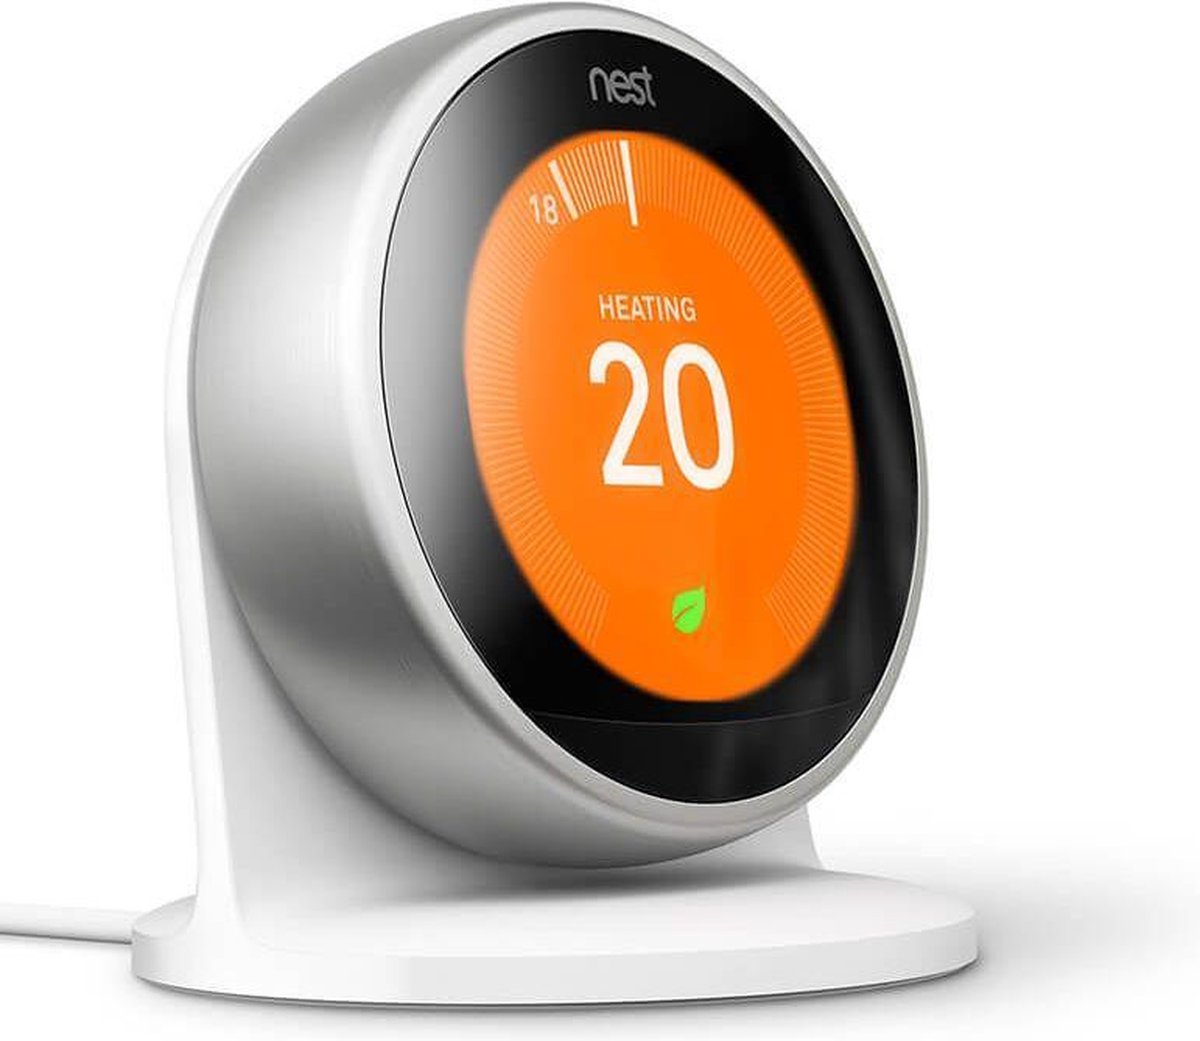 Google Nest Learning Thermostat - Slimme thermostaat - RVS | bol.com